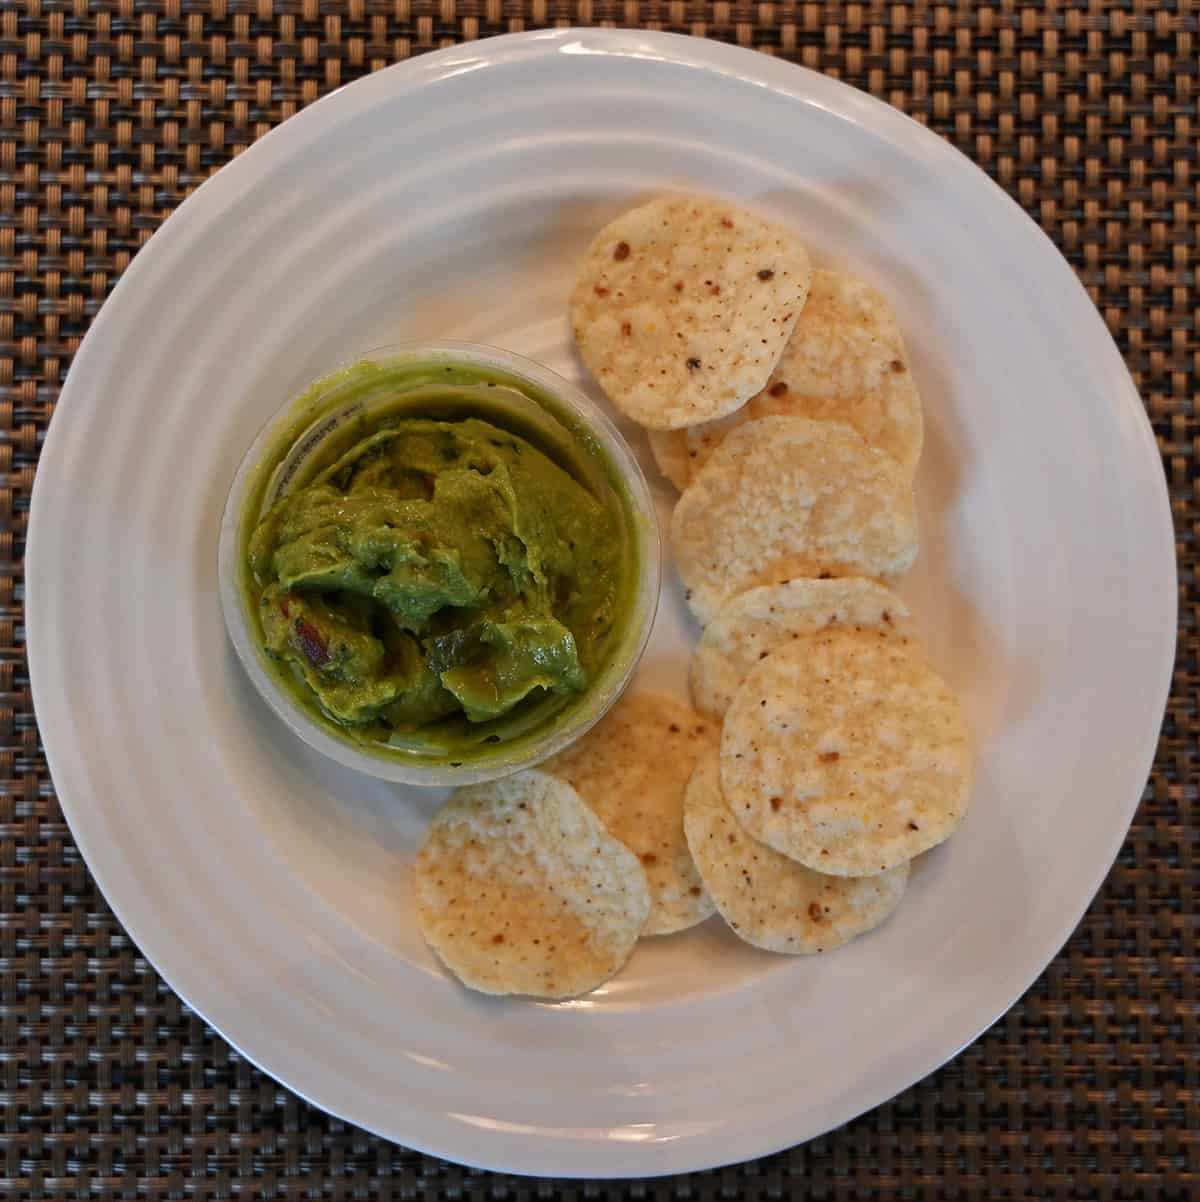 Top down image of a white plate with tortilla chips on it and beside the chips is an open guacamole cup.